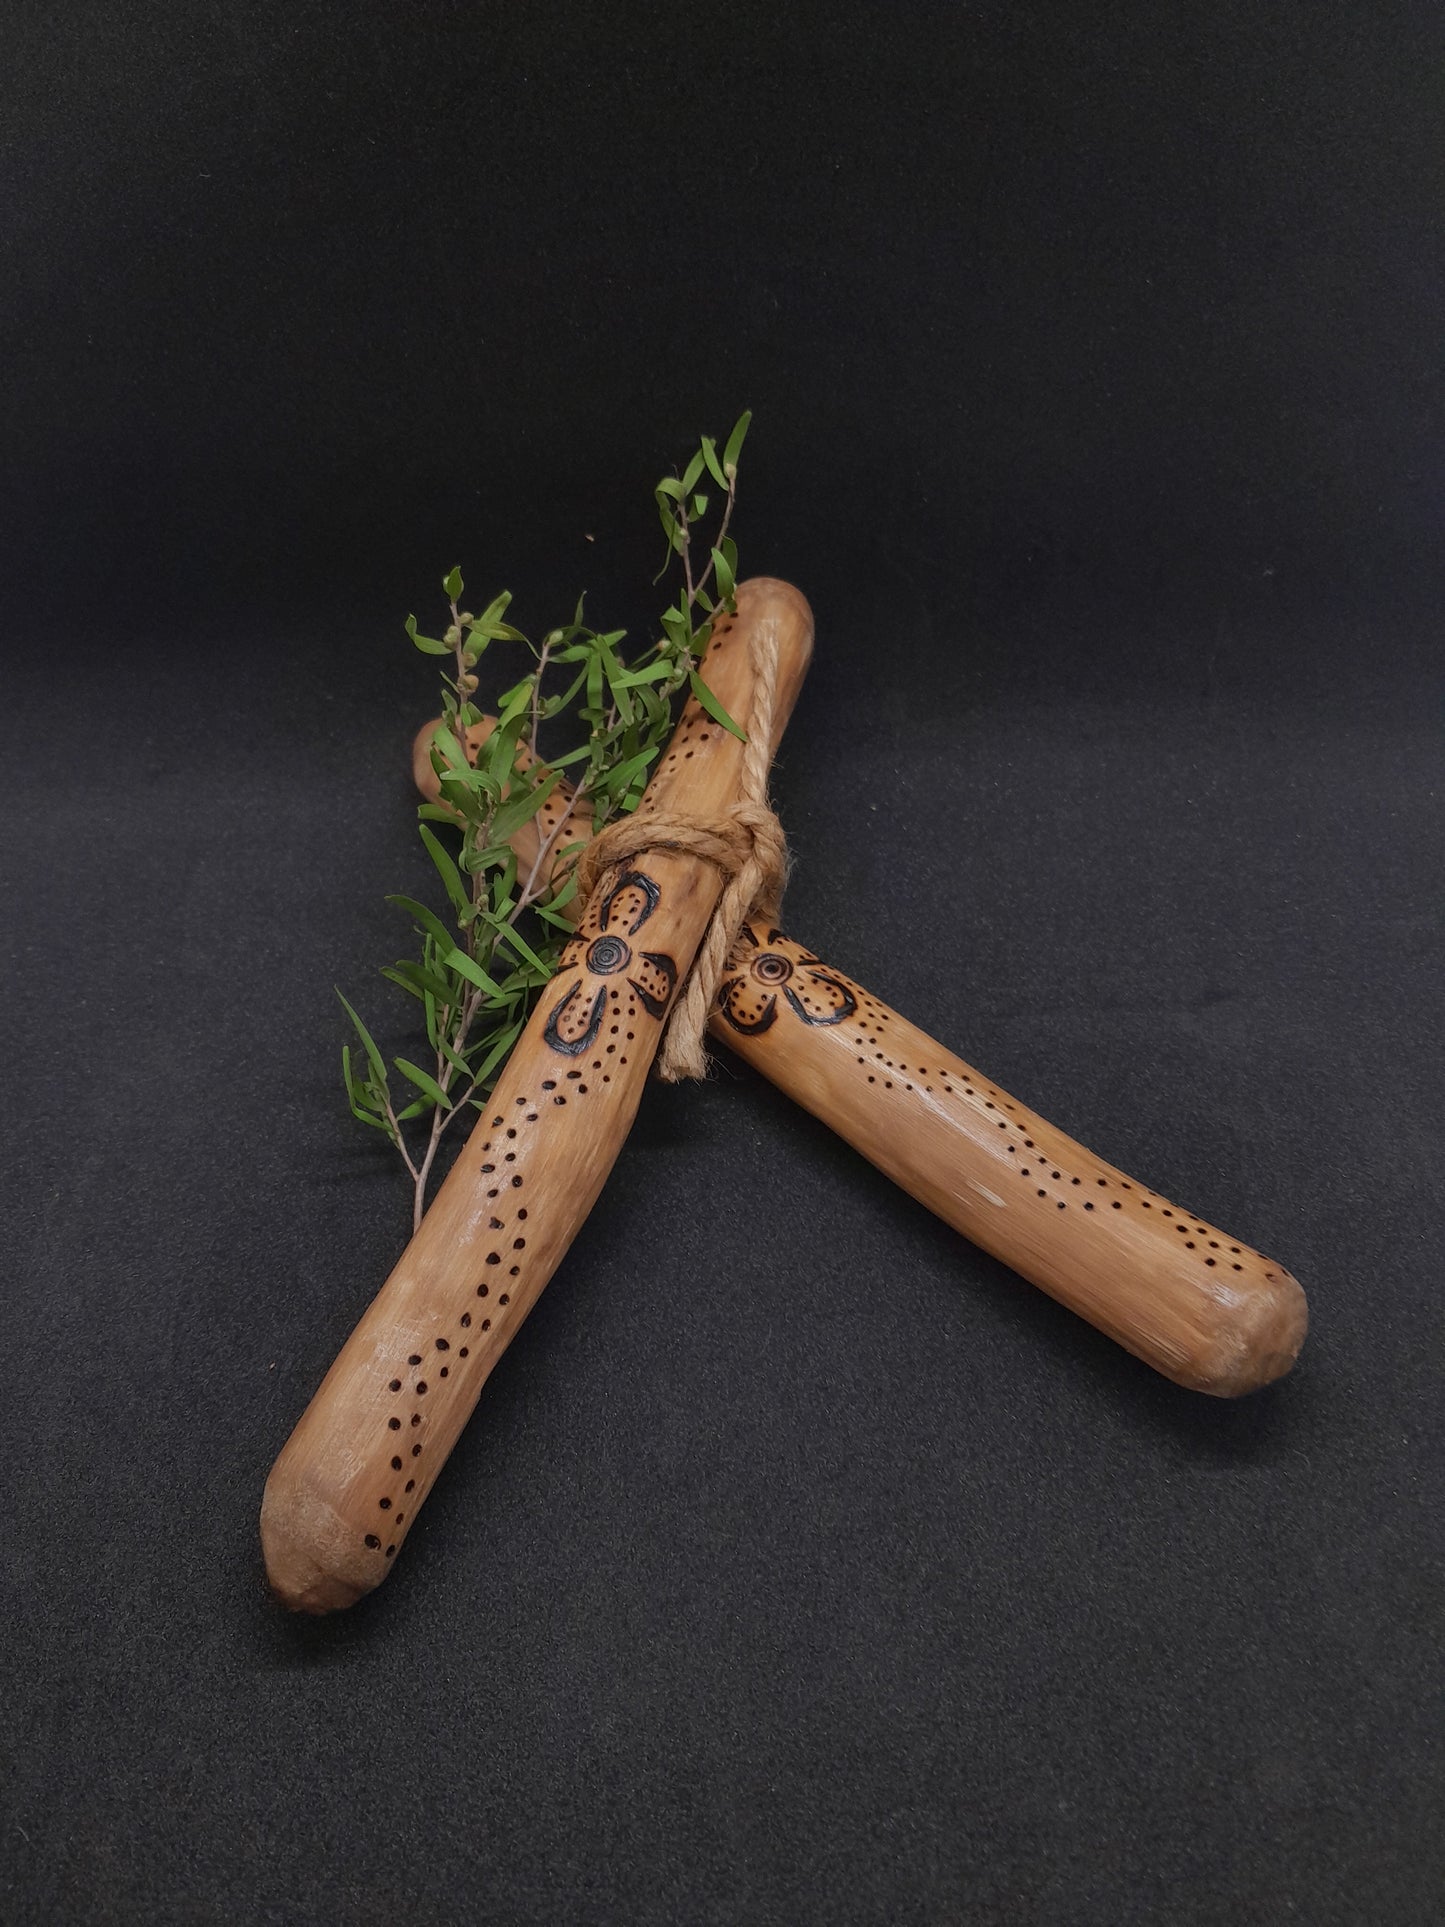 Clap Sticks First Nations Culture - Hand Crafted Burnt Wood design. Aboriginal, Indigenous Art, Artifact